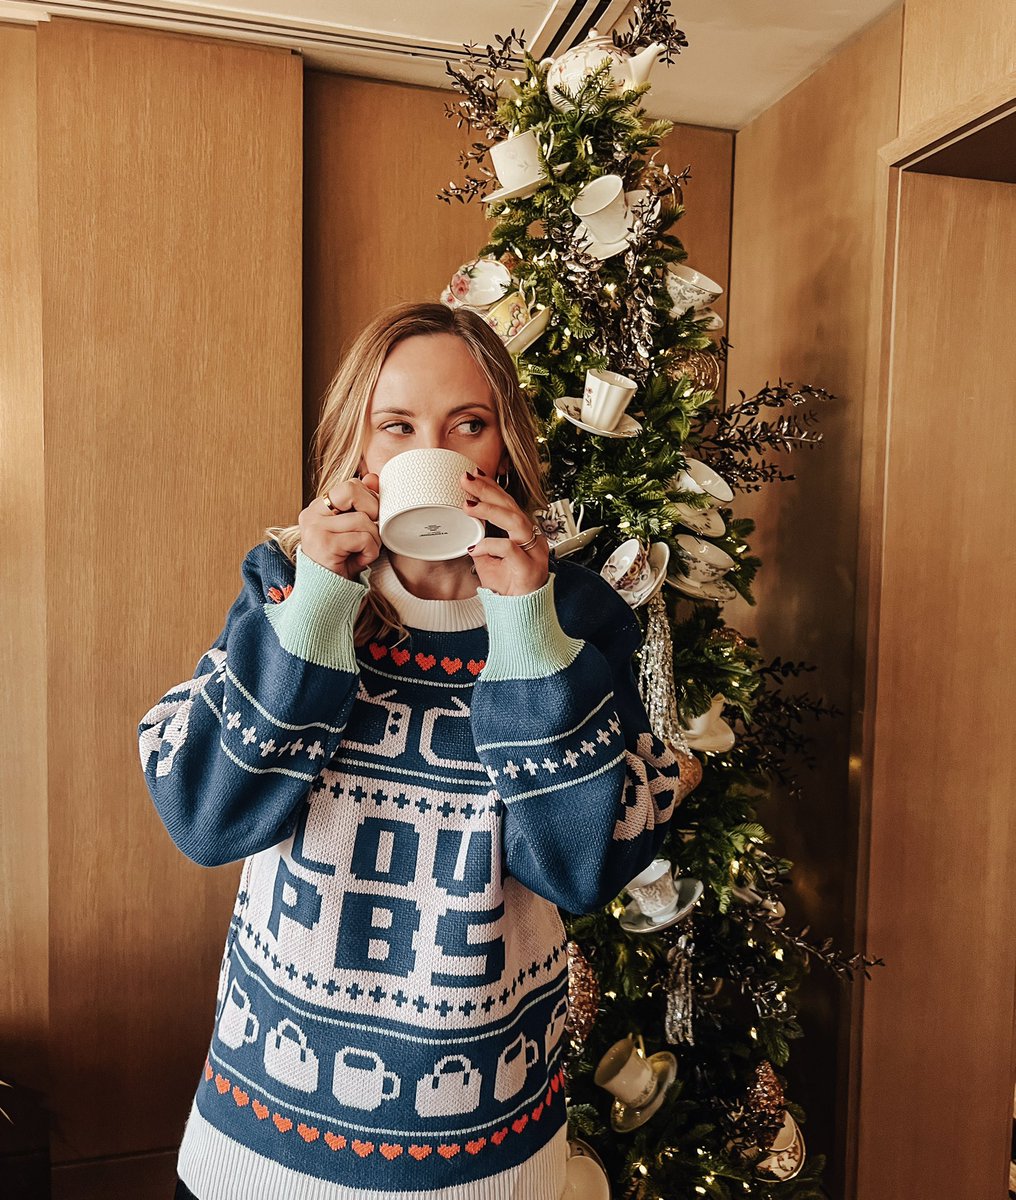 My two favorite things: Christmas tea and @PBS. Thanks for making this #NationalUglySweaterDay special.